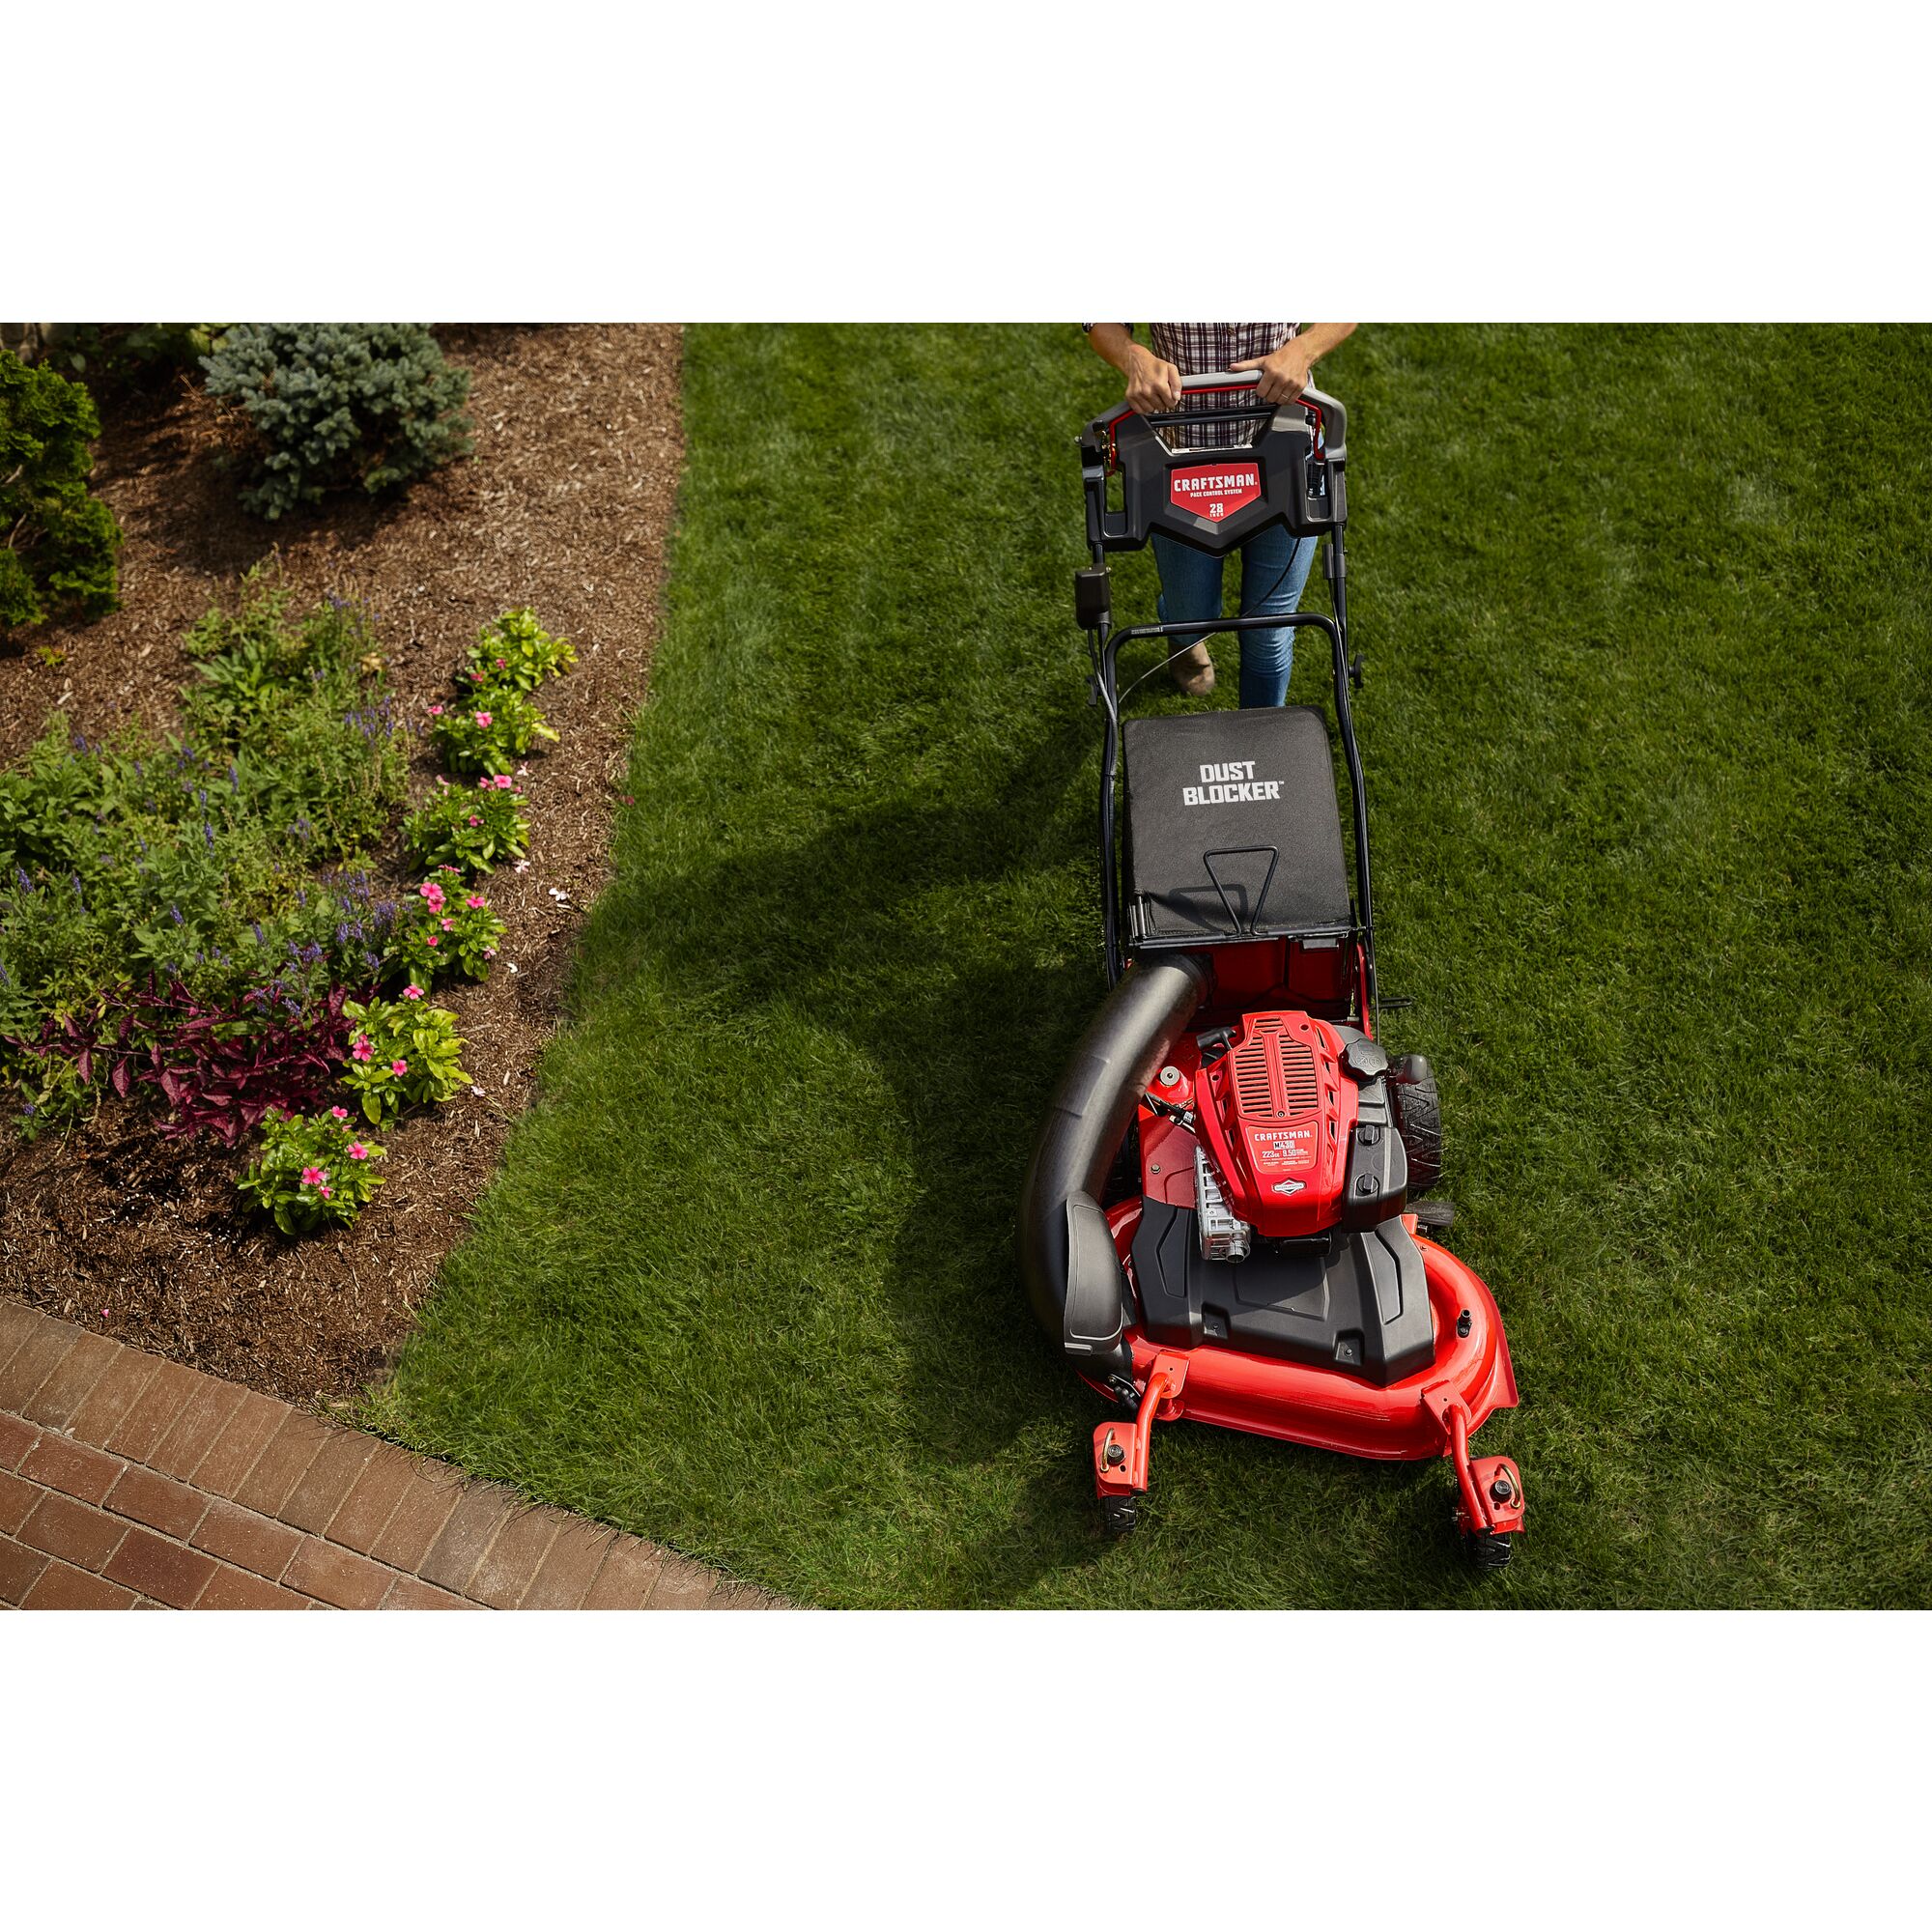 CRAFTSMAN M430 28-In. 223cc Rwd Self-Propelled Mower mowing near flowerbed and sidewalk overhead view with jeans and plaid shirt